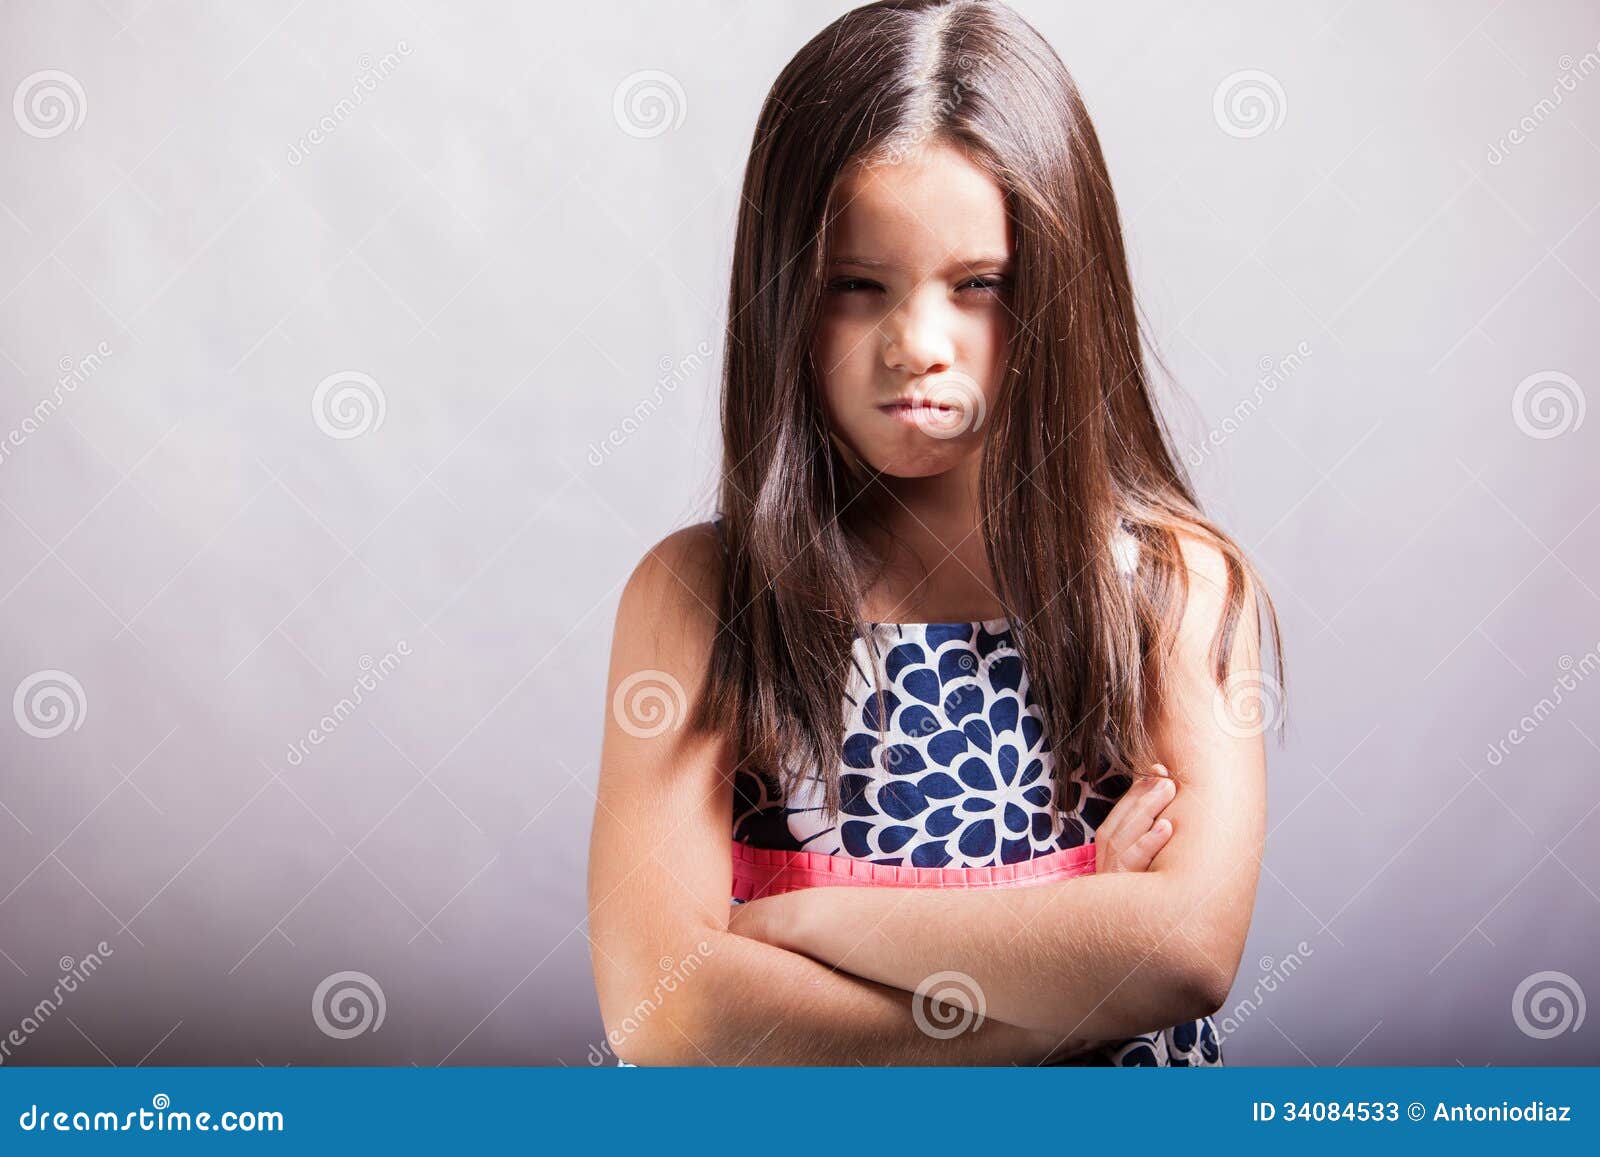 very angry little girl